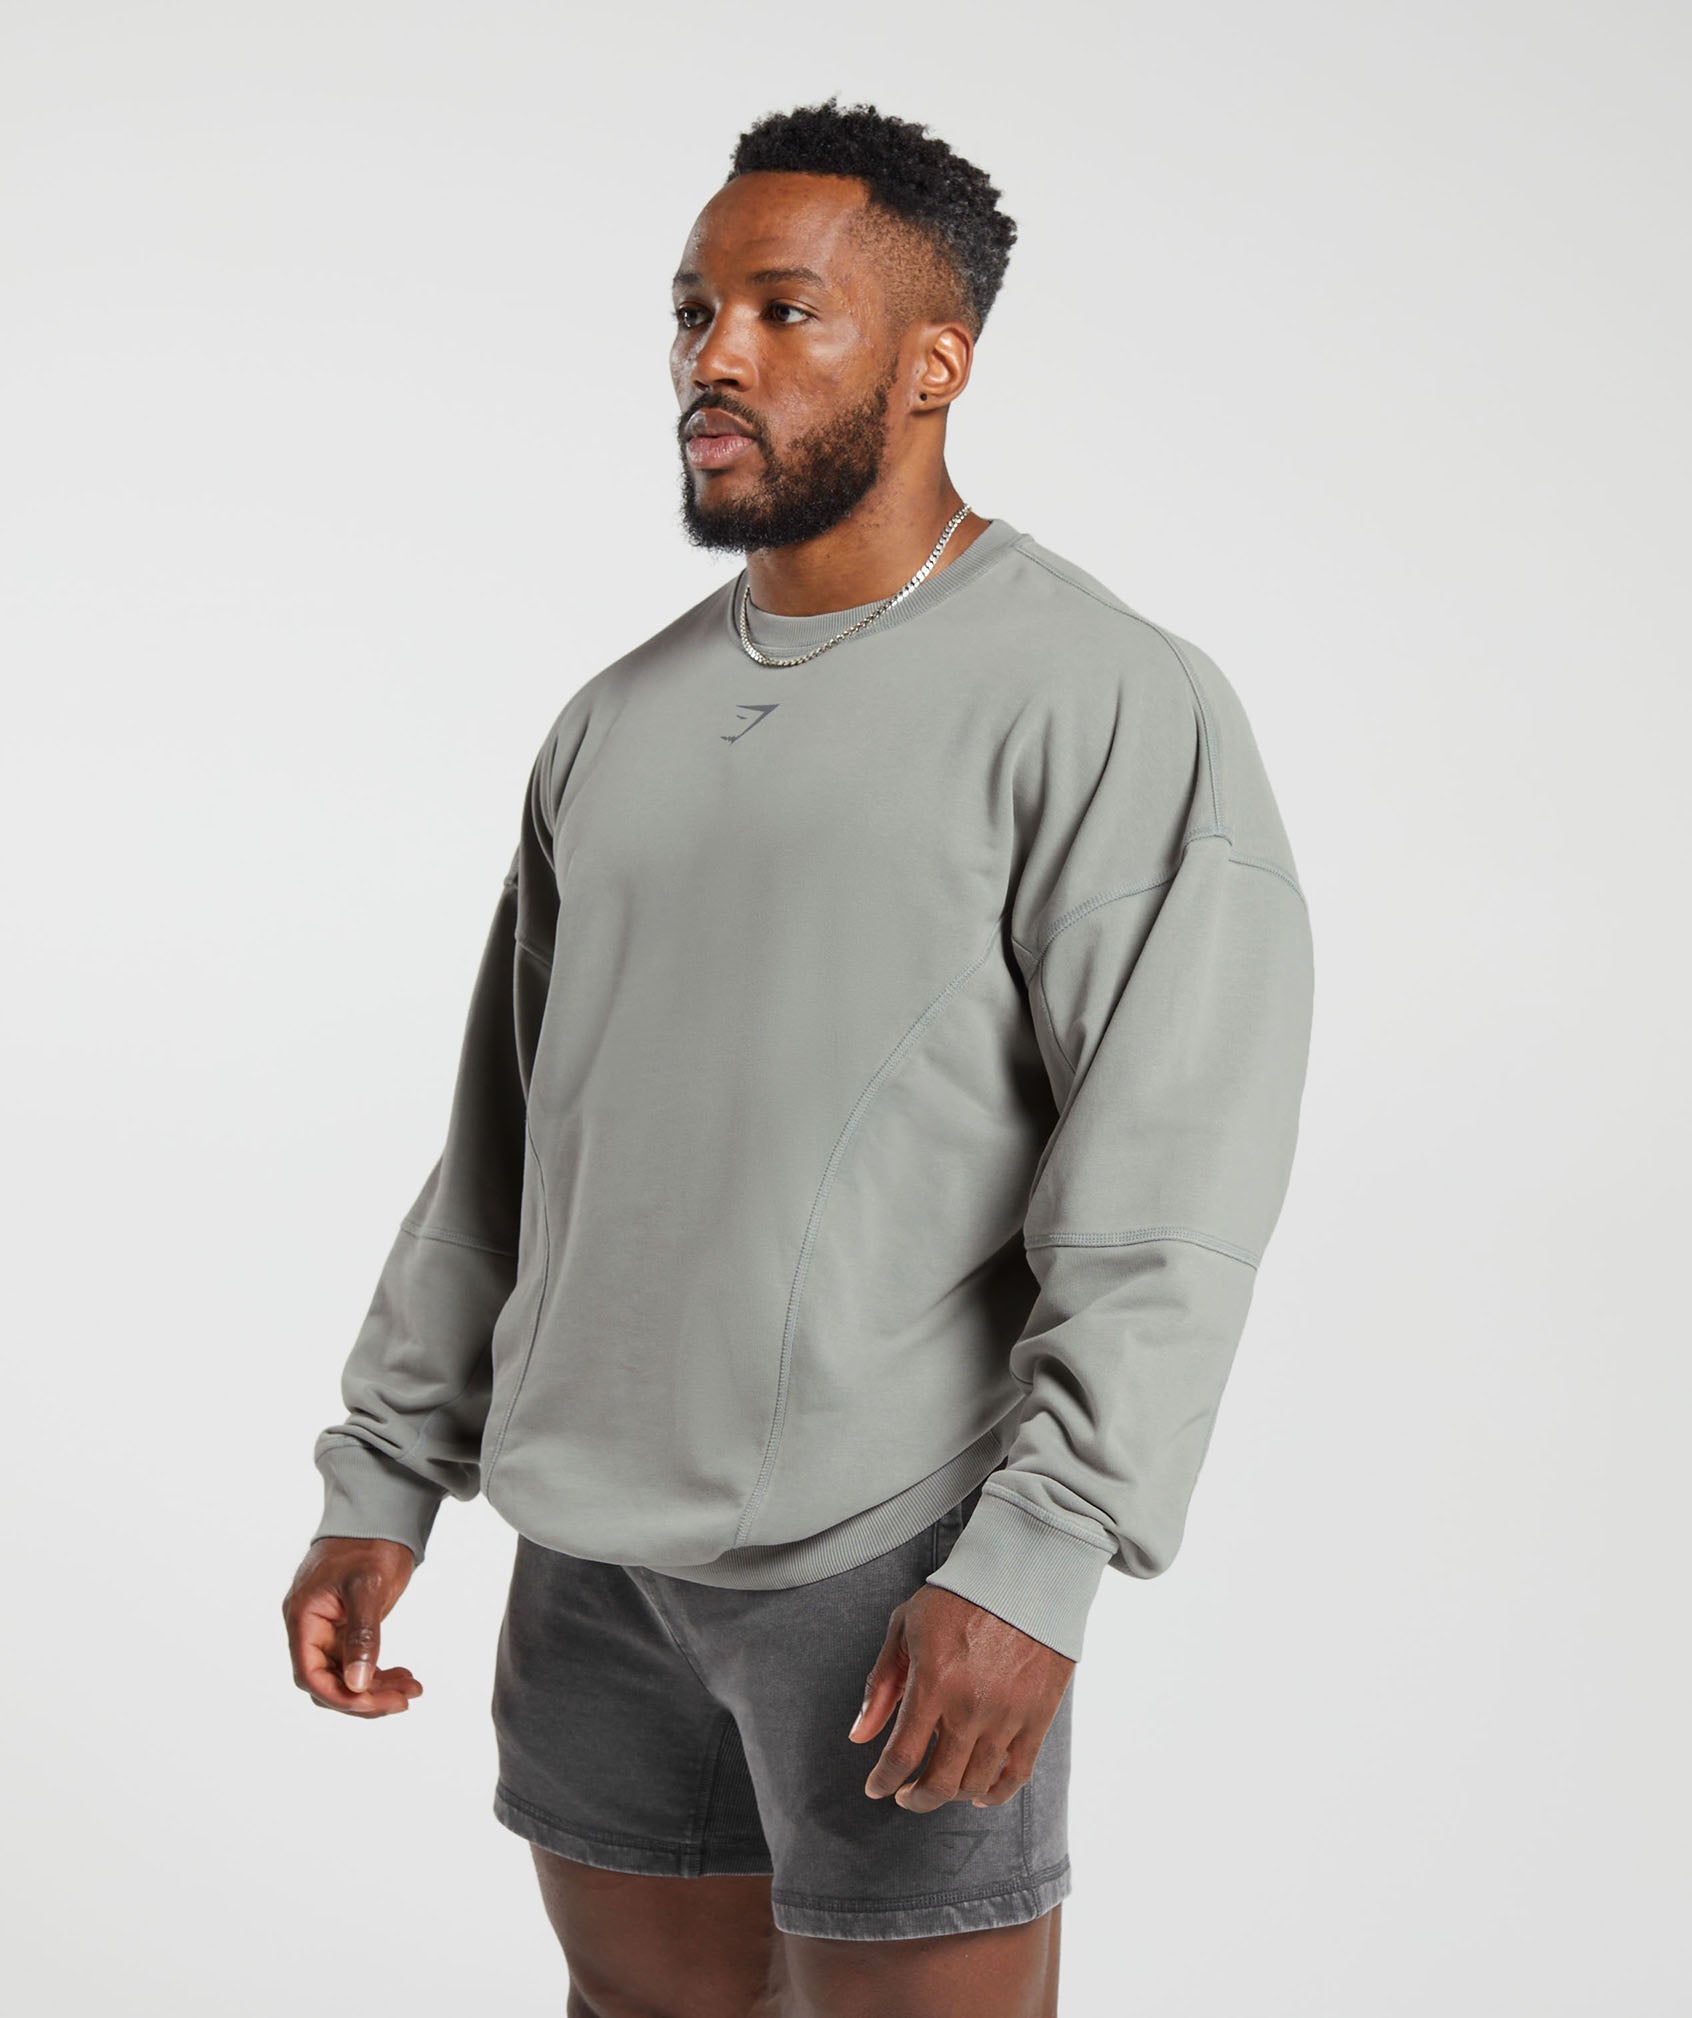 Heritage Washed Crew in Smokey Grey - view 3